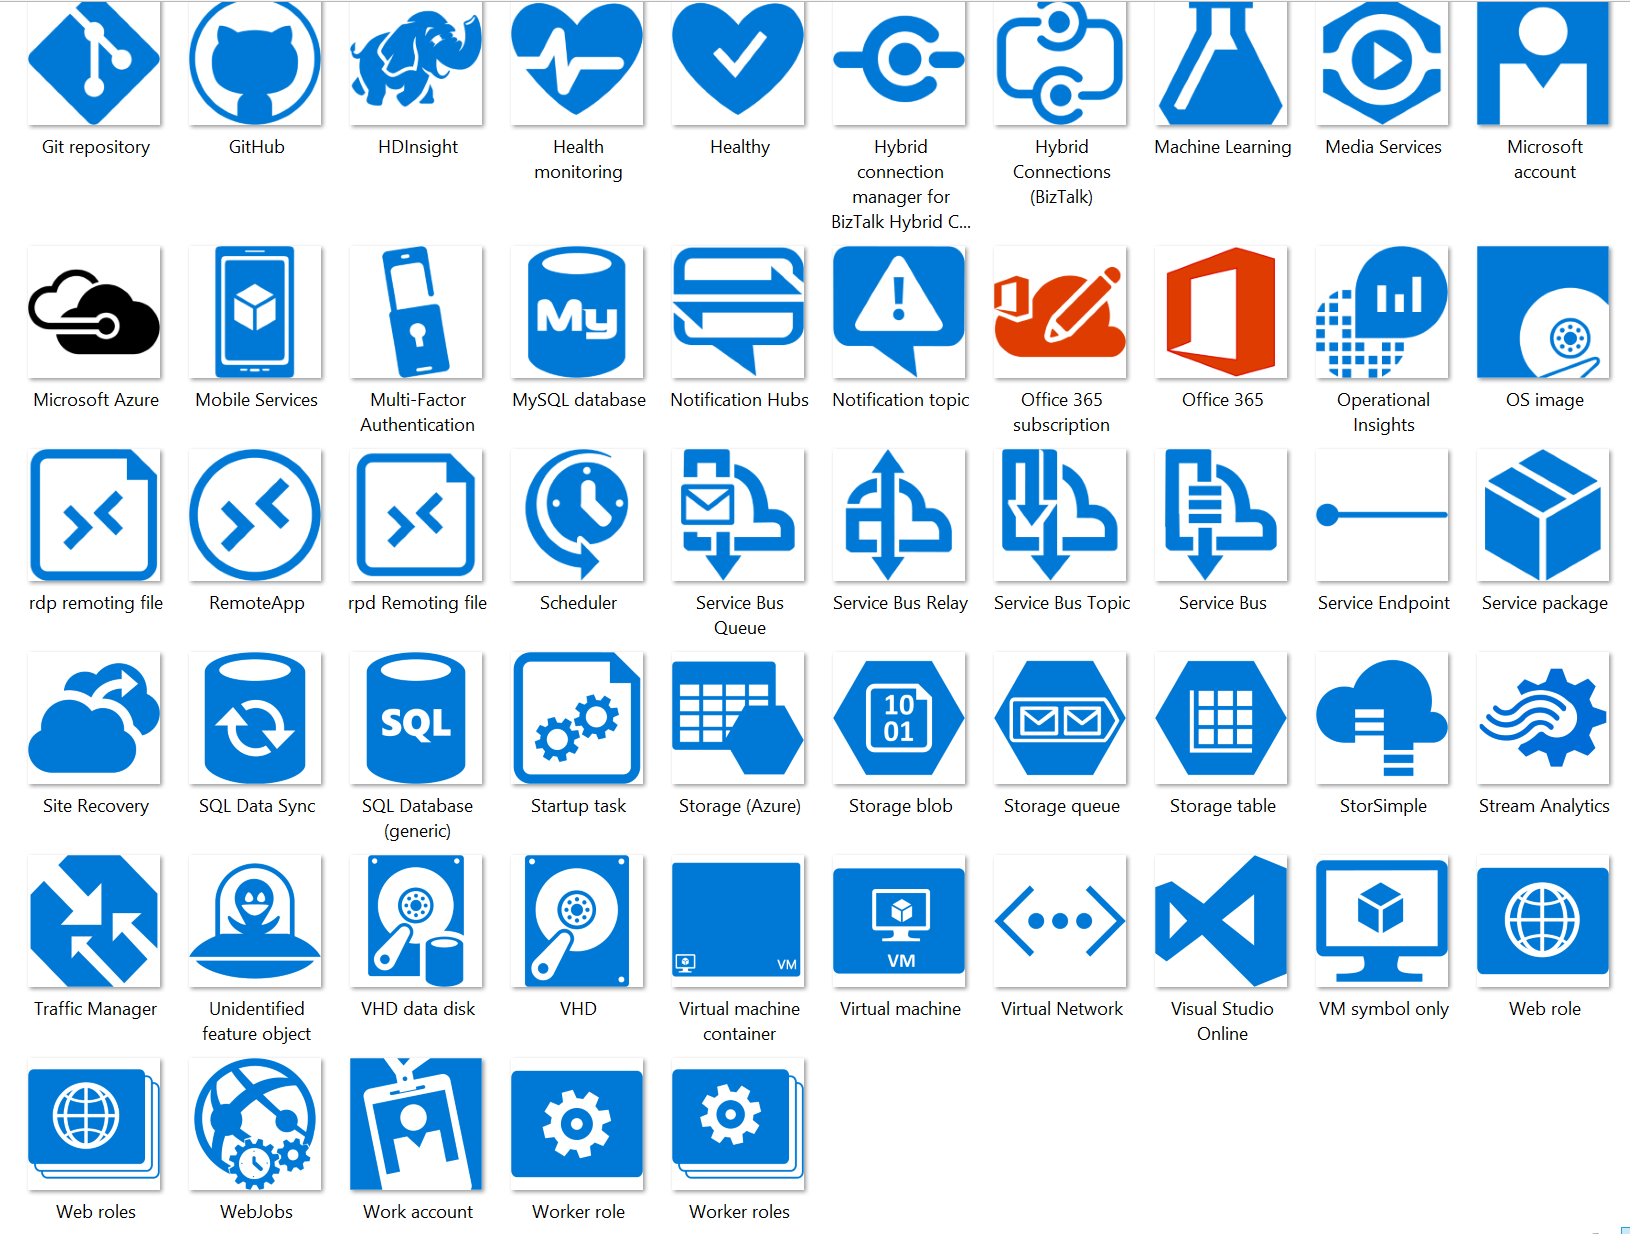 powerpoint icons library free